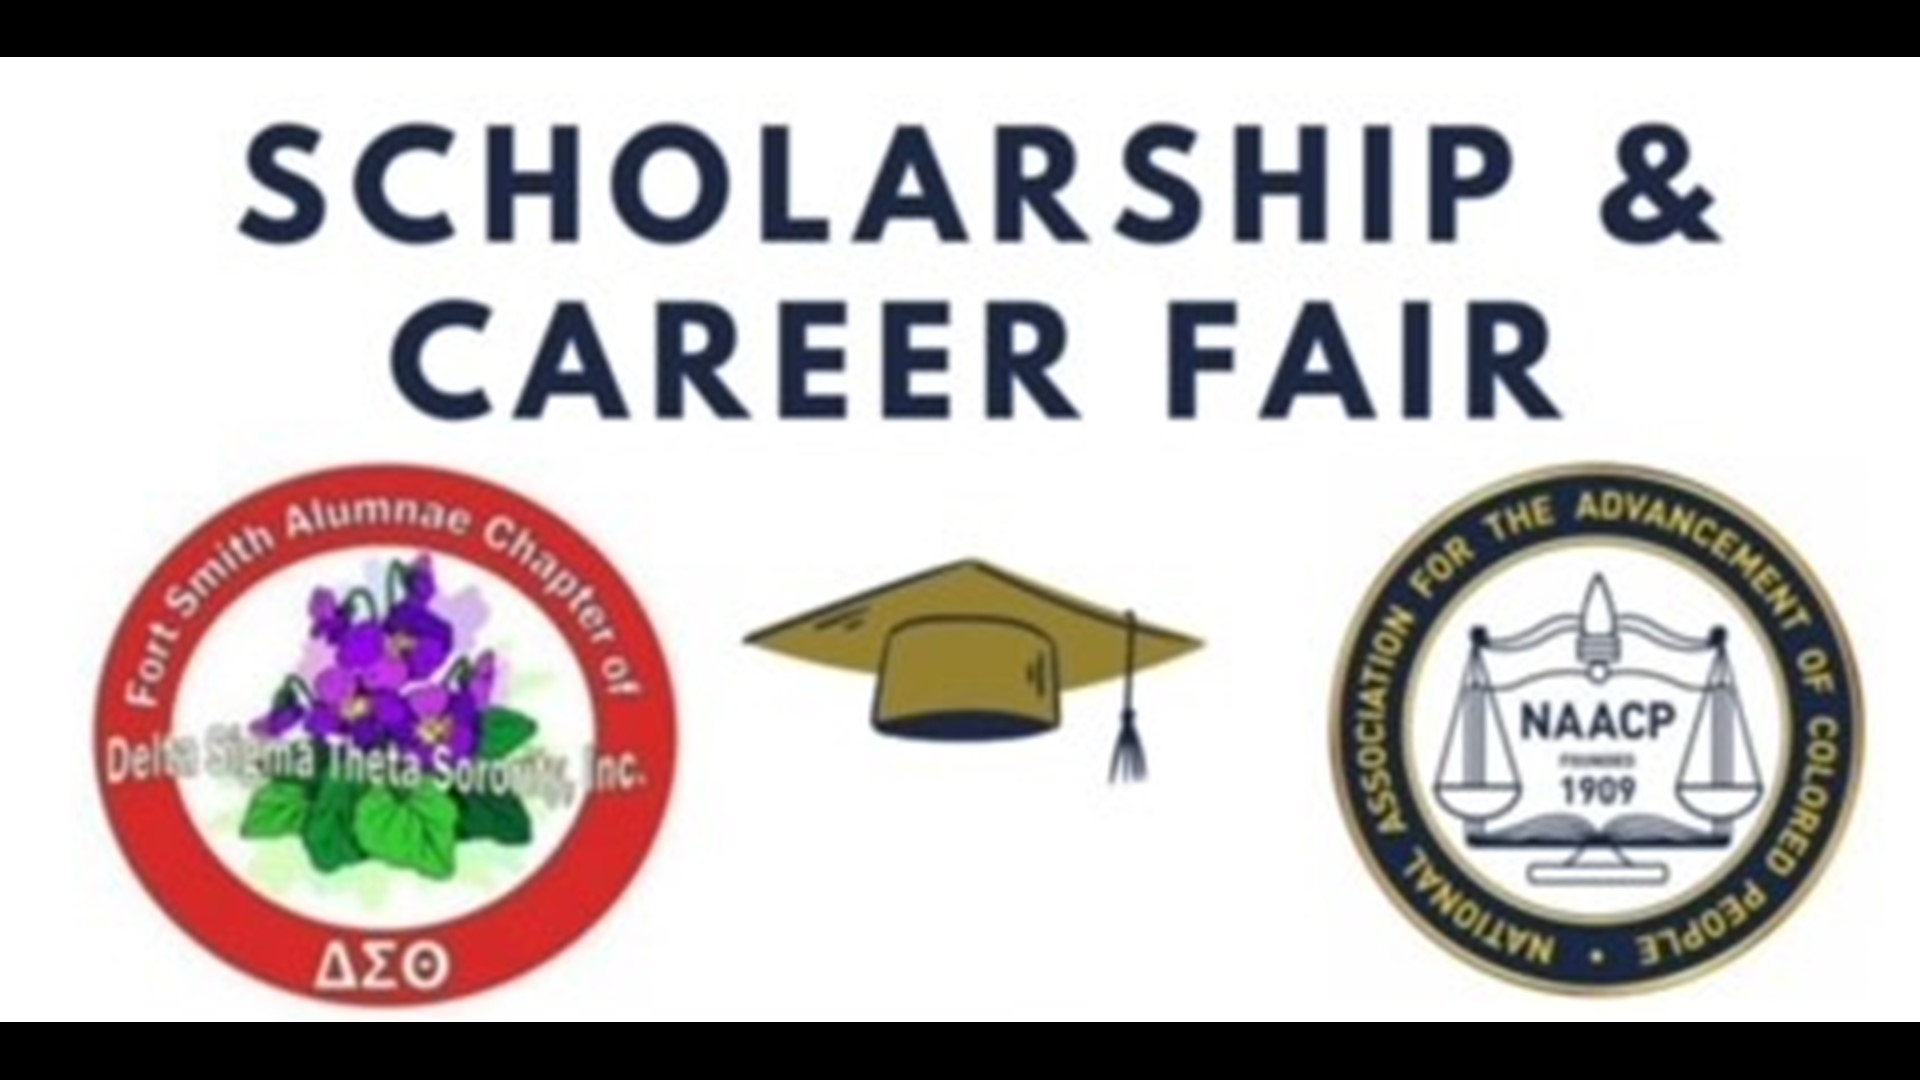 If you are a parent of a senior in high school, this fair is for you and your child.  Daren finds out when and where and why it's so important to attend.